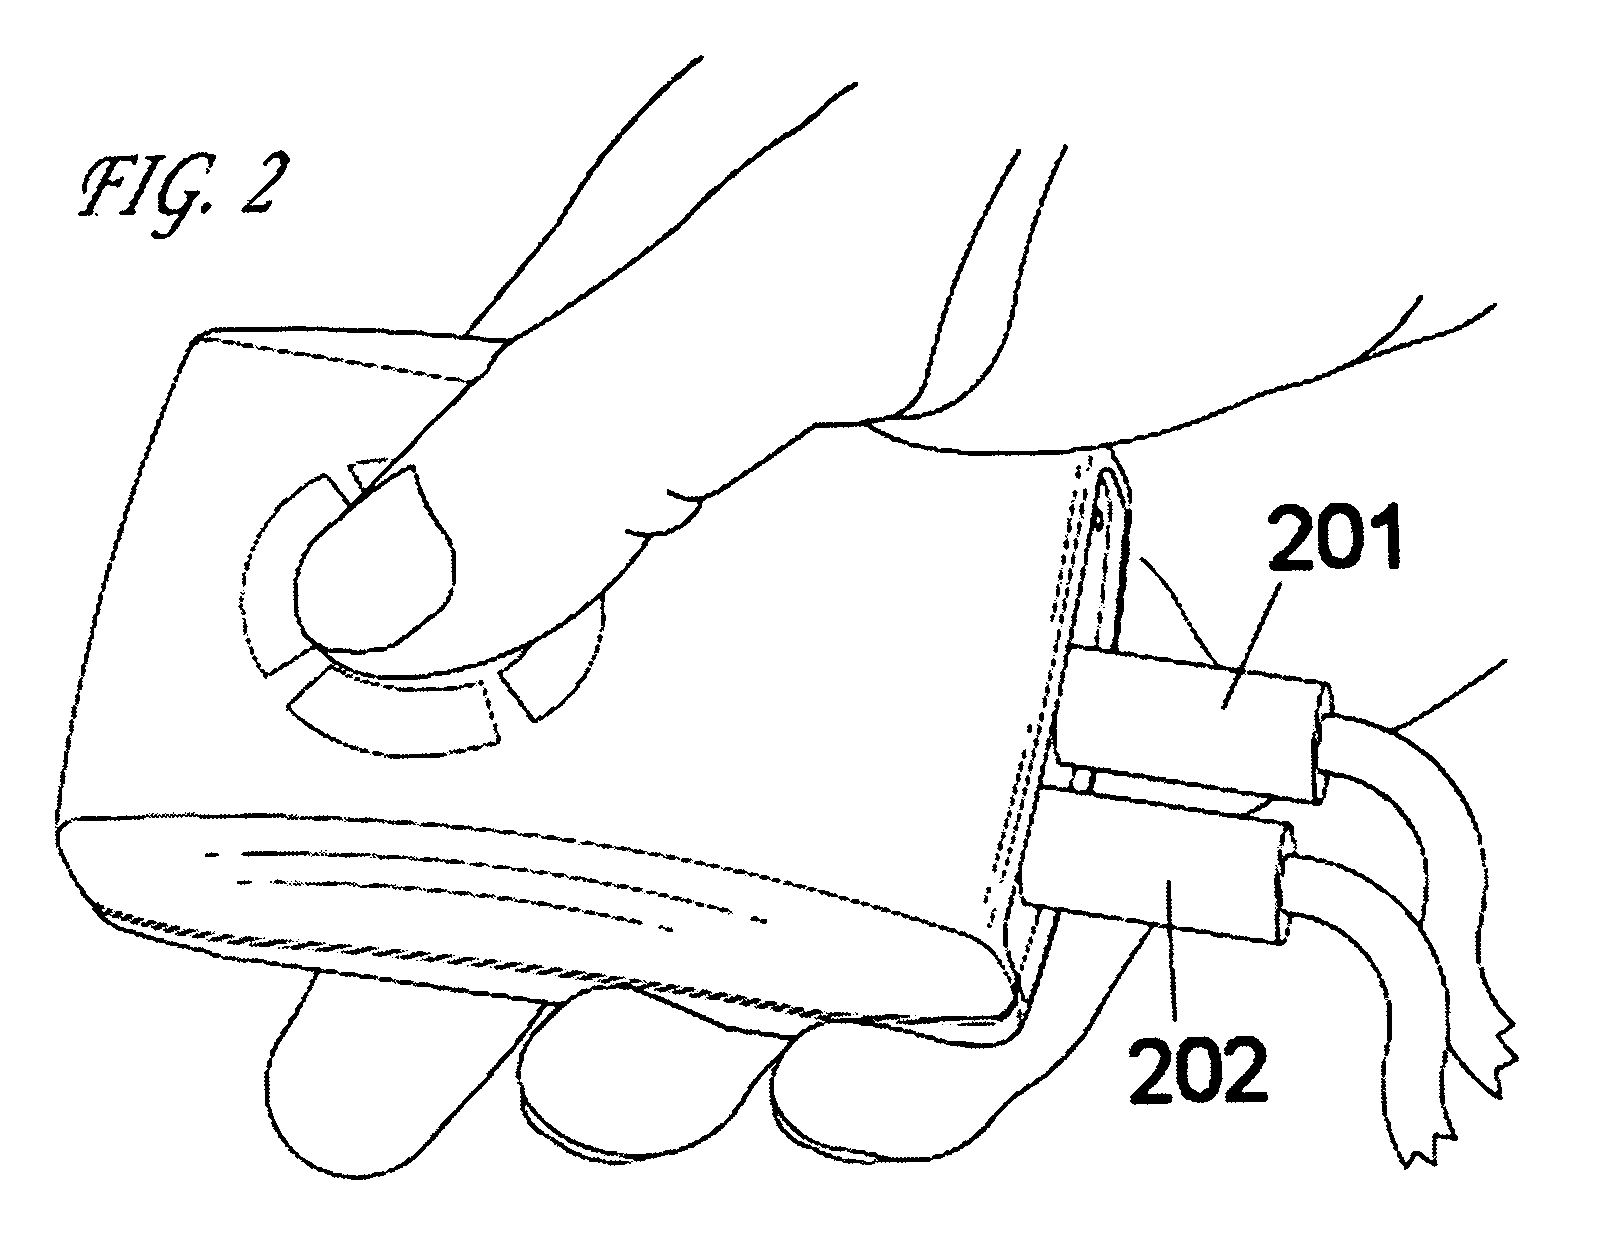 Portable audiometer enclosed within a patient response mechanism housing